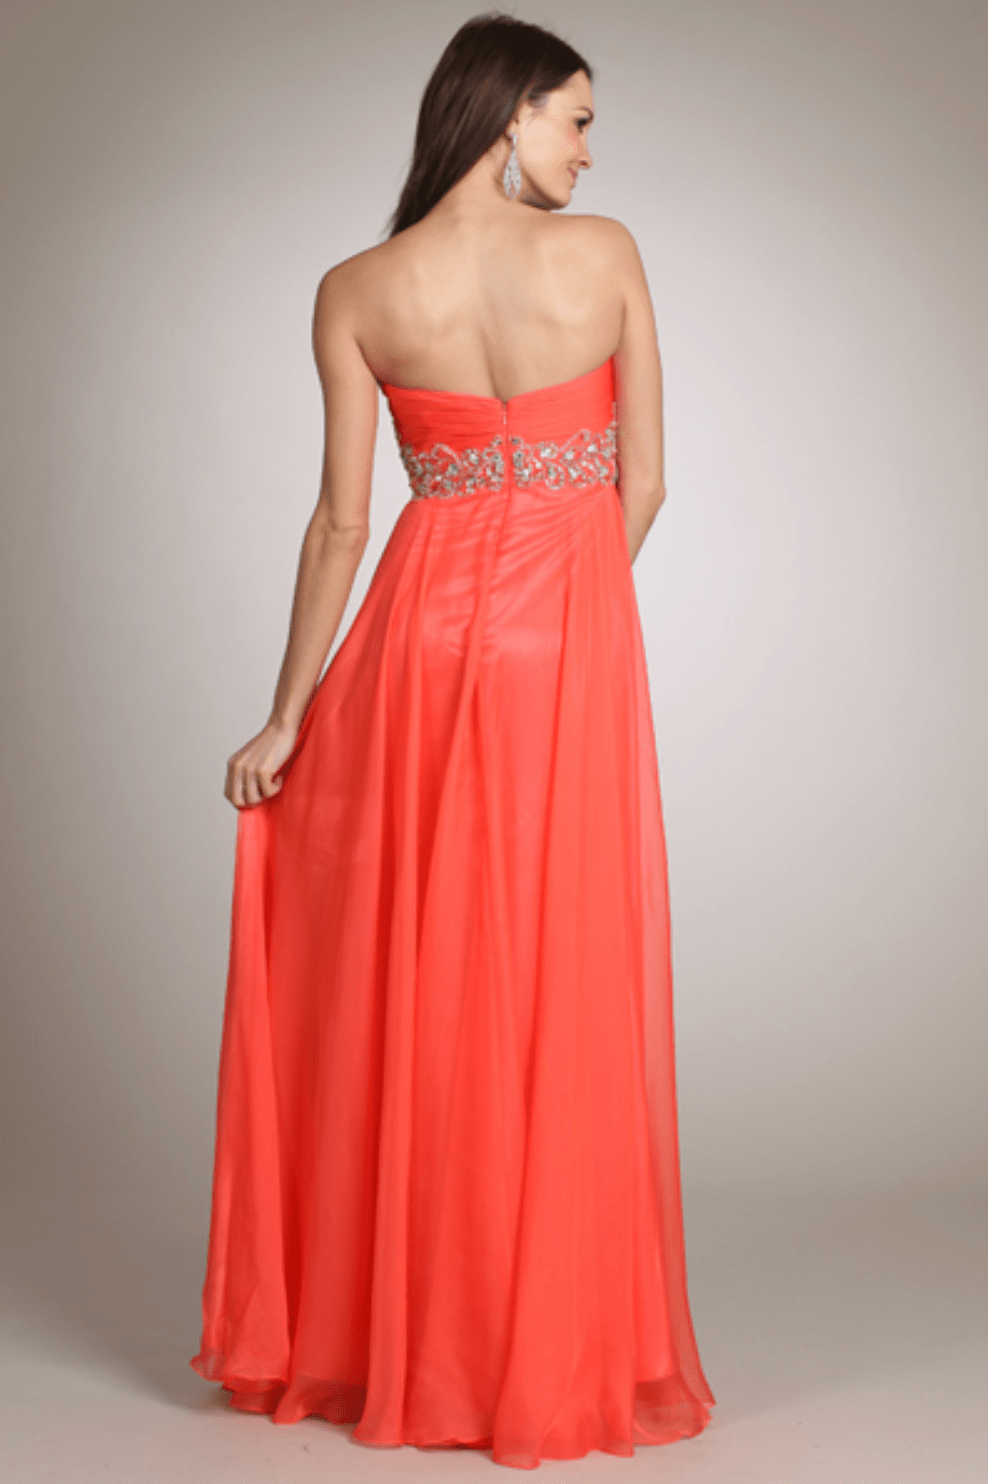 Strapless Sweetheart Crystal Embroidered Chiffon Long Dress by Fiesta | 3 Colors - NORMA REED